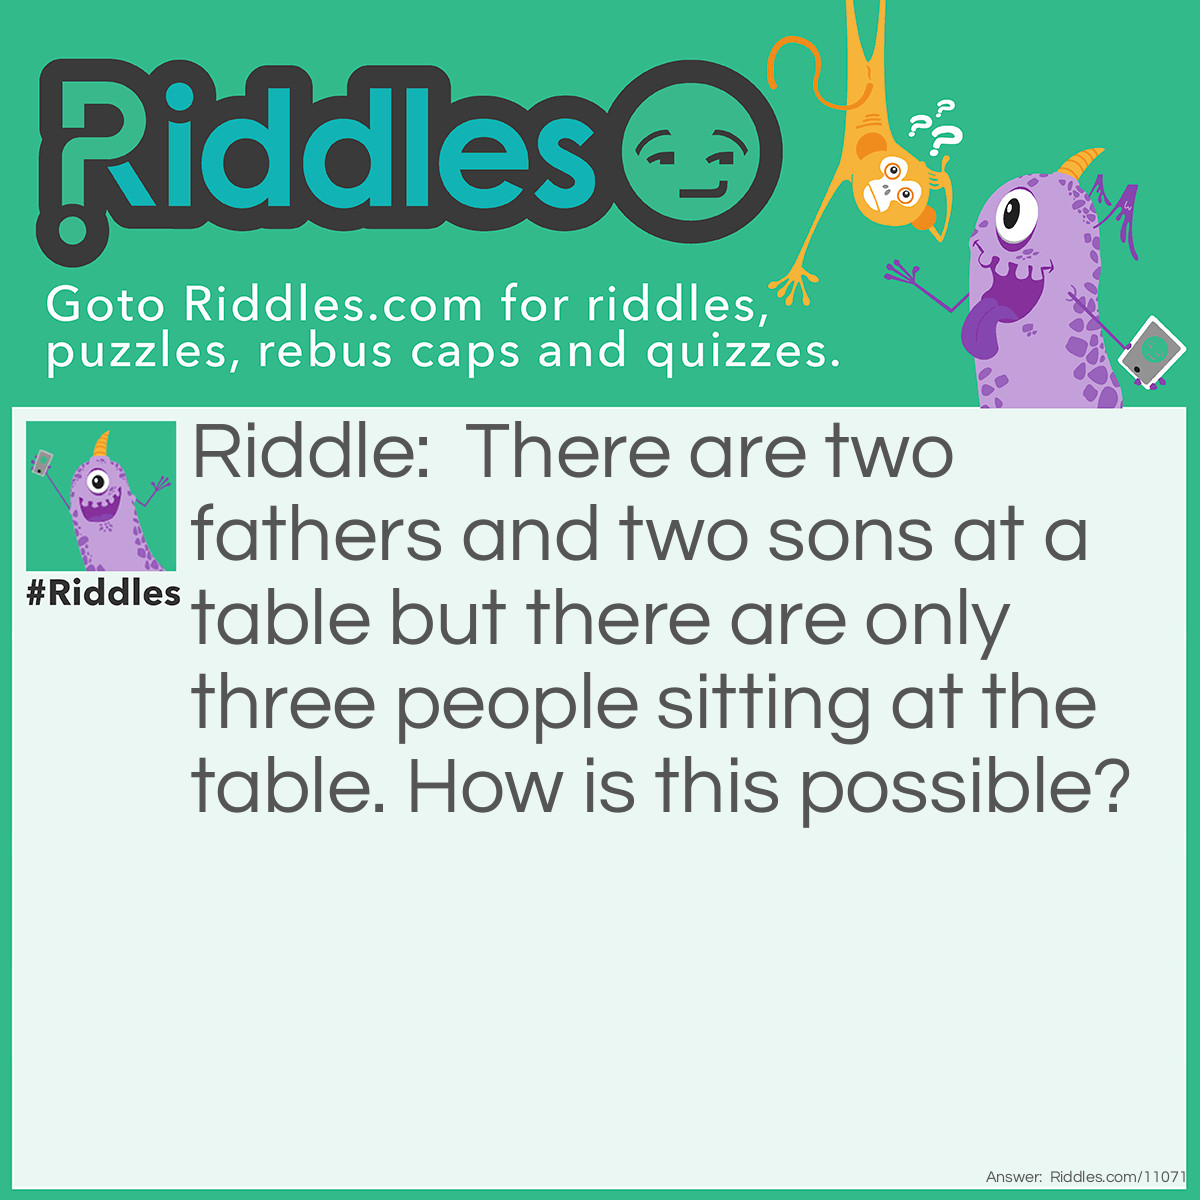 Riddle: There are two fathers and two sons at a table but there are only three people sitting at the table. How is this possible? Answer: They are grandfather, father and son.